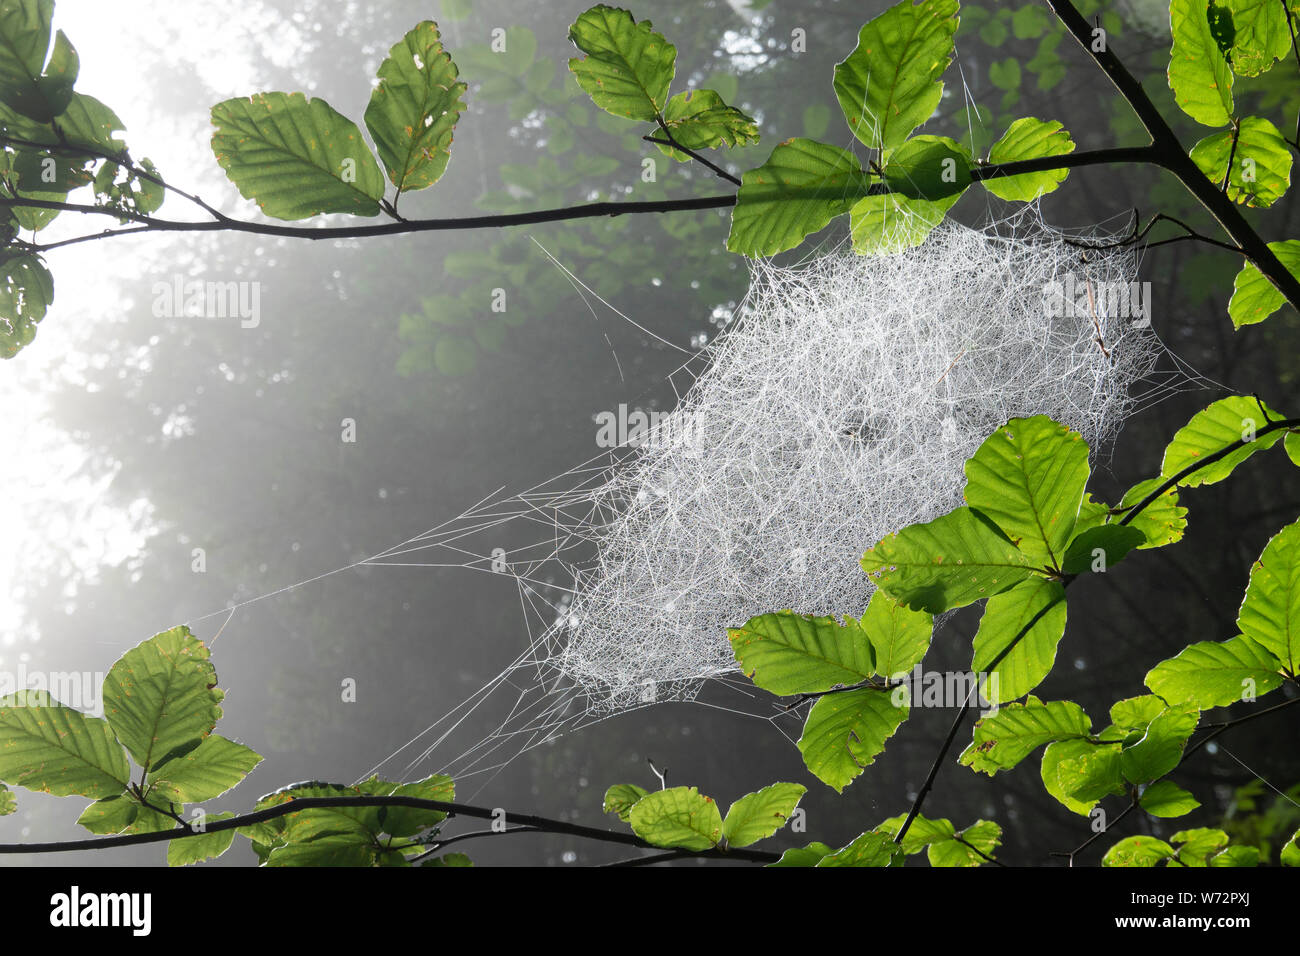 Beautiful Sheet Spider web in foggy green forest Stock Photo - Alamy